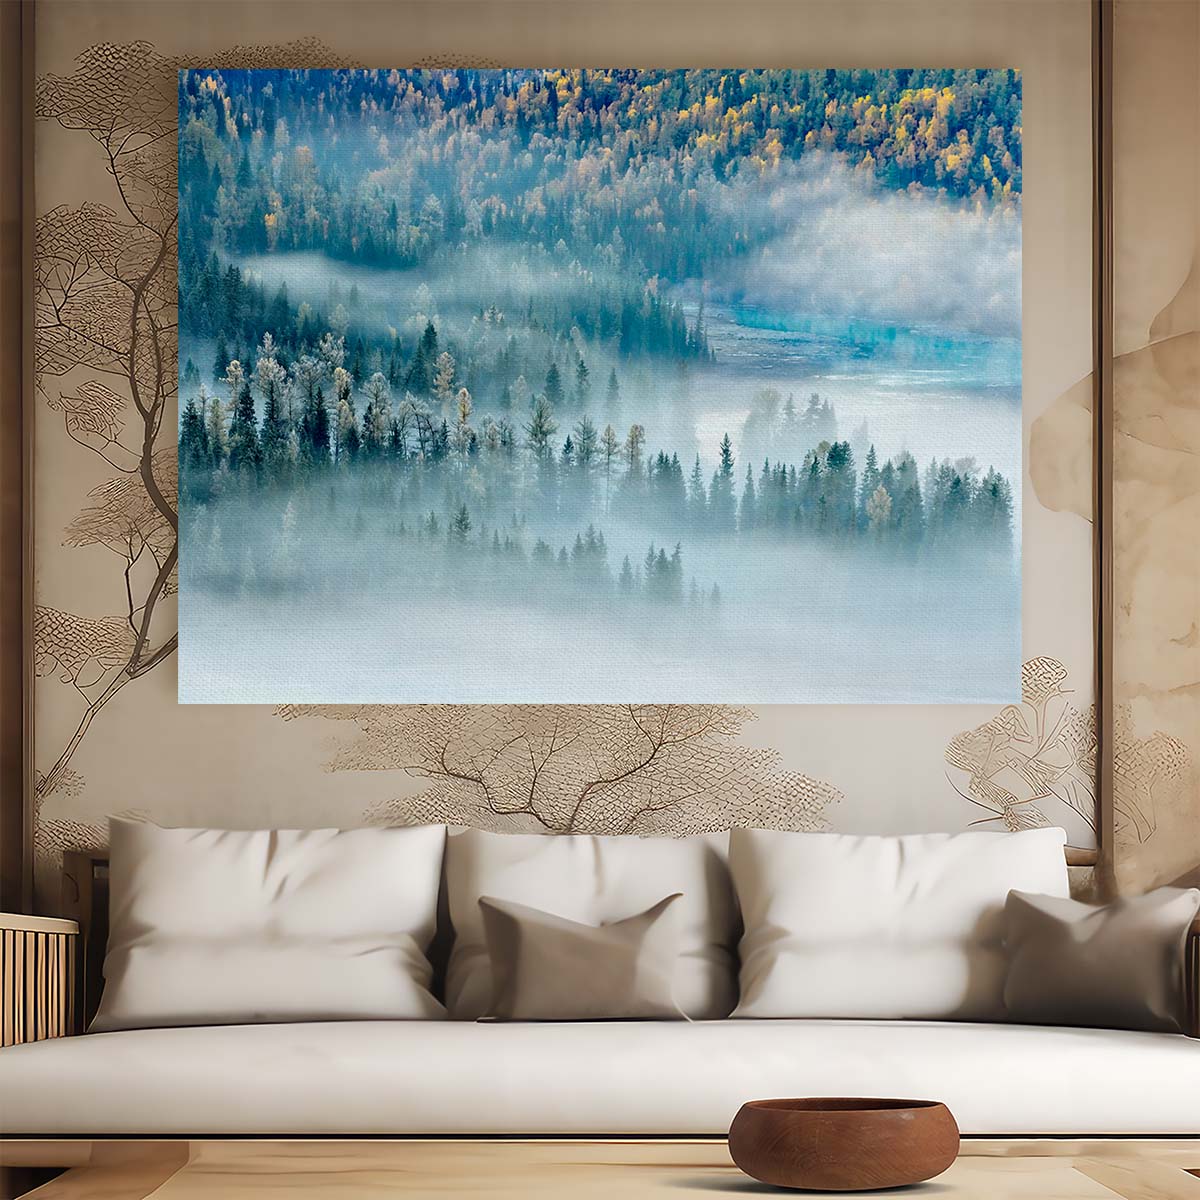 Enchanted Xinjiang Forest Sunrise Mist Wall Art by Luxuriance Designs. Made in USA.